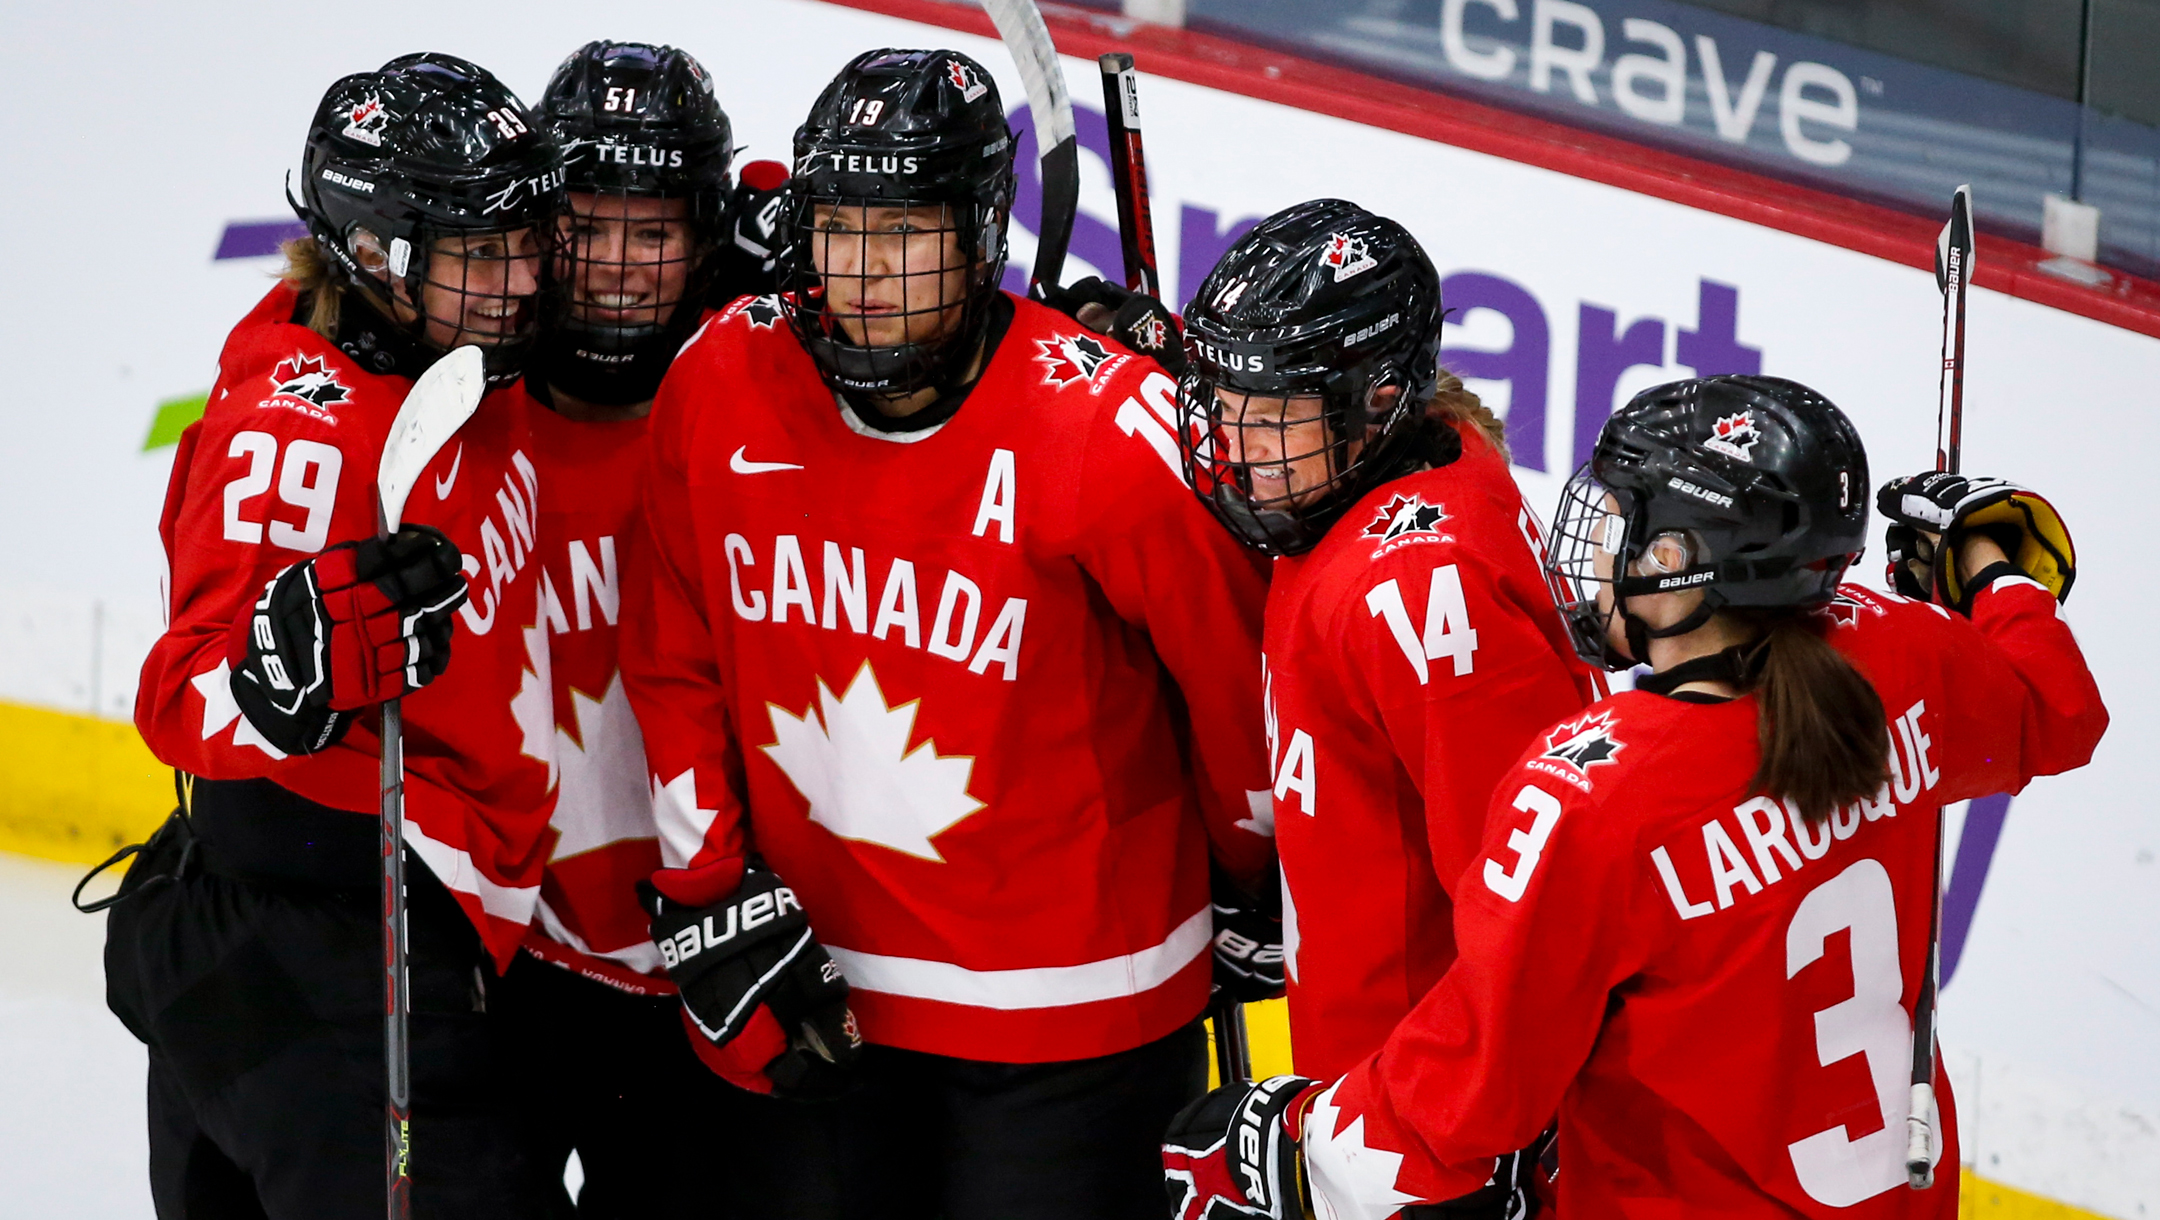 Team Canada Will Play Team Usa For Iihf Women S Worlds Title Team Canada Official Olympic Team Website